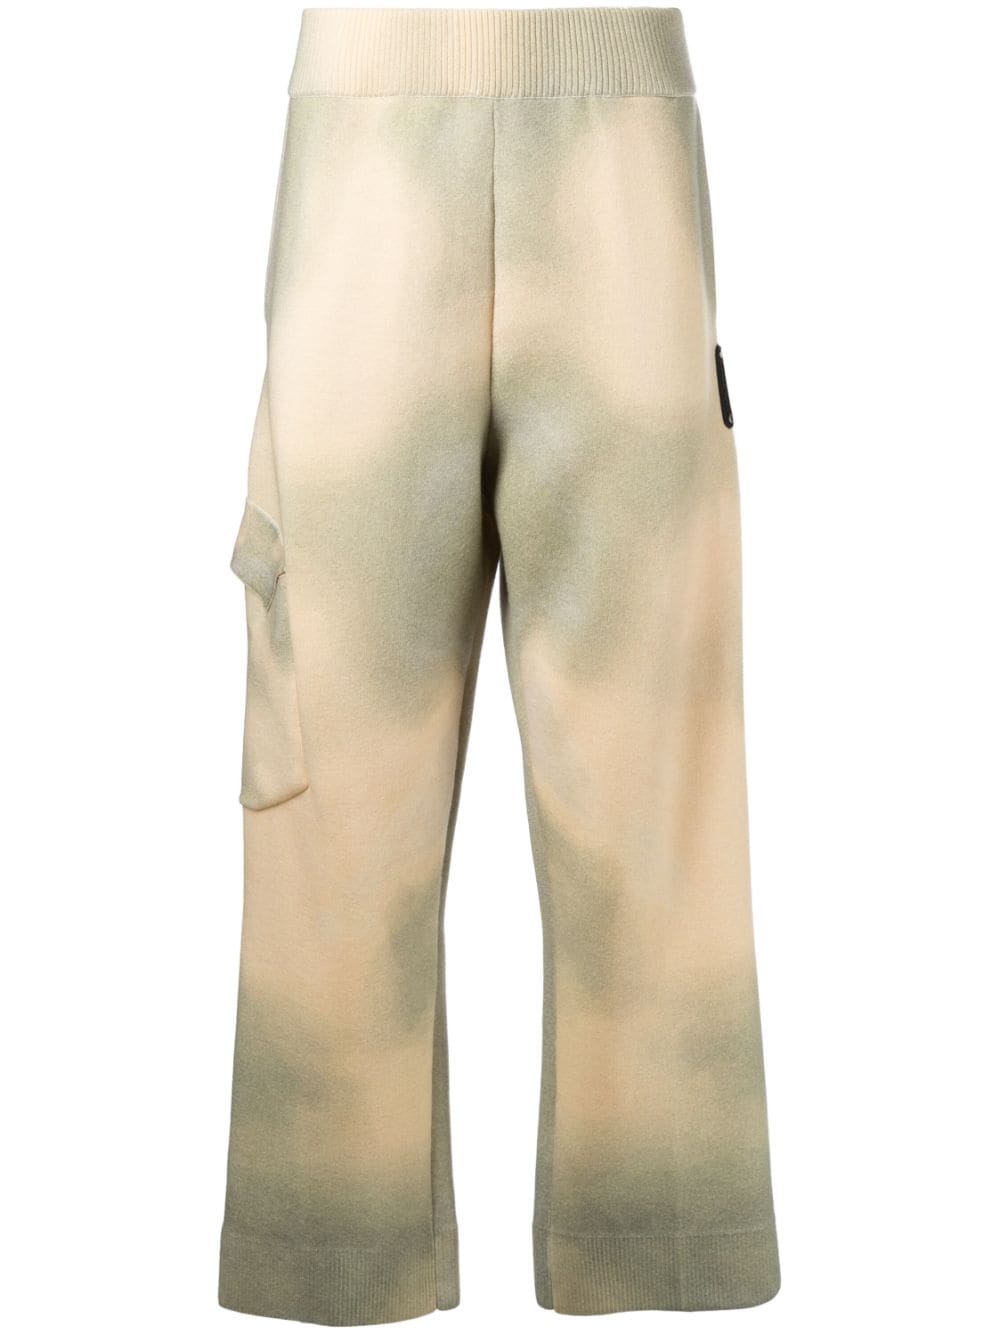 A-COLD-WALL* gradient high-waist trousers - Yellow